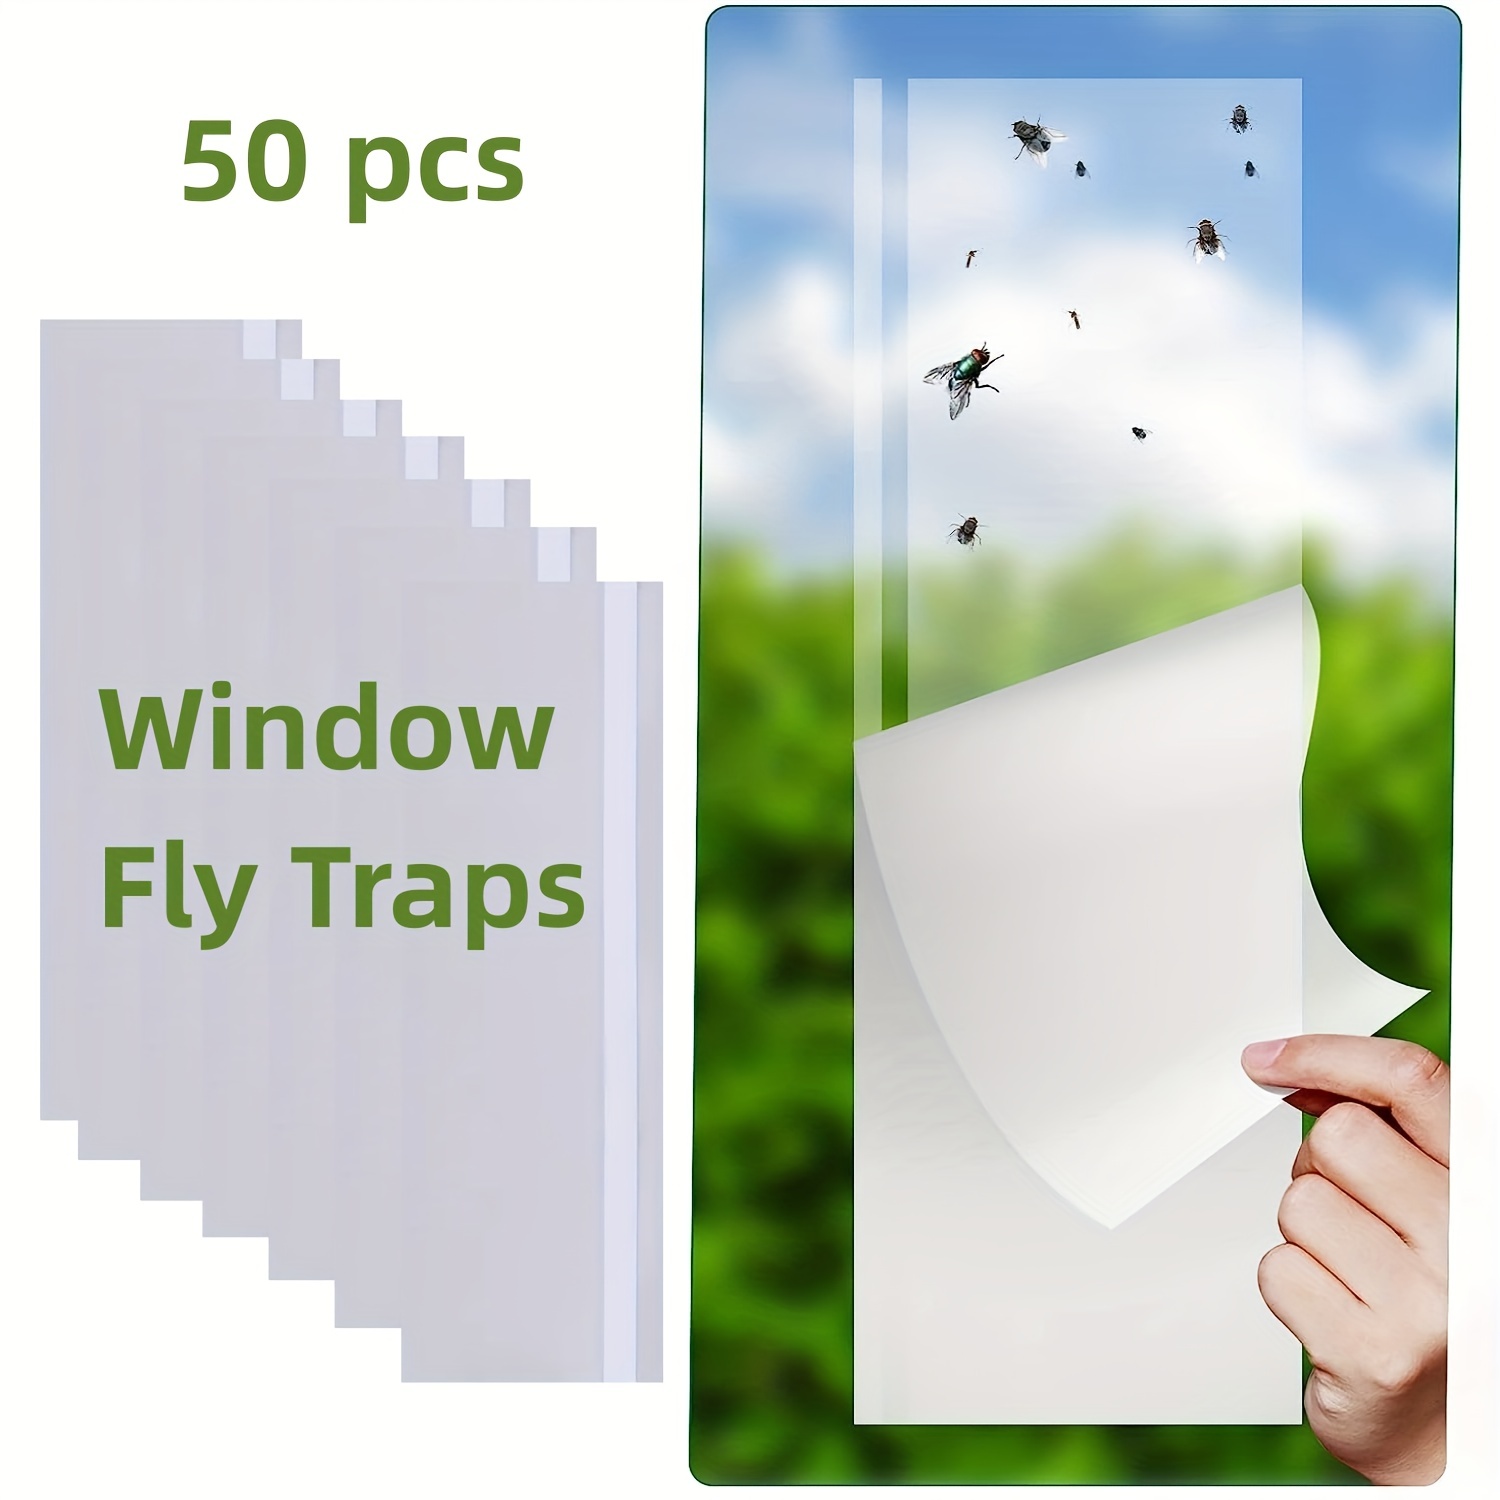 24 Rolls Fly Strips - Fly Tapes Fly Paper Sticky Fly Trap Indoor/Outdoor  Hanging,Fly Catcher Fly Ribbon Fungus Gnat Trap Fruit Fly Killer for